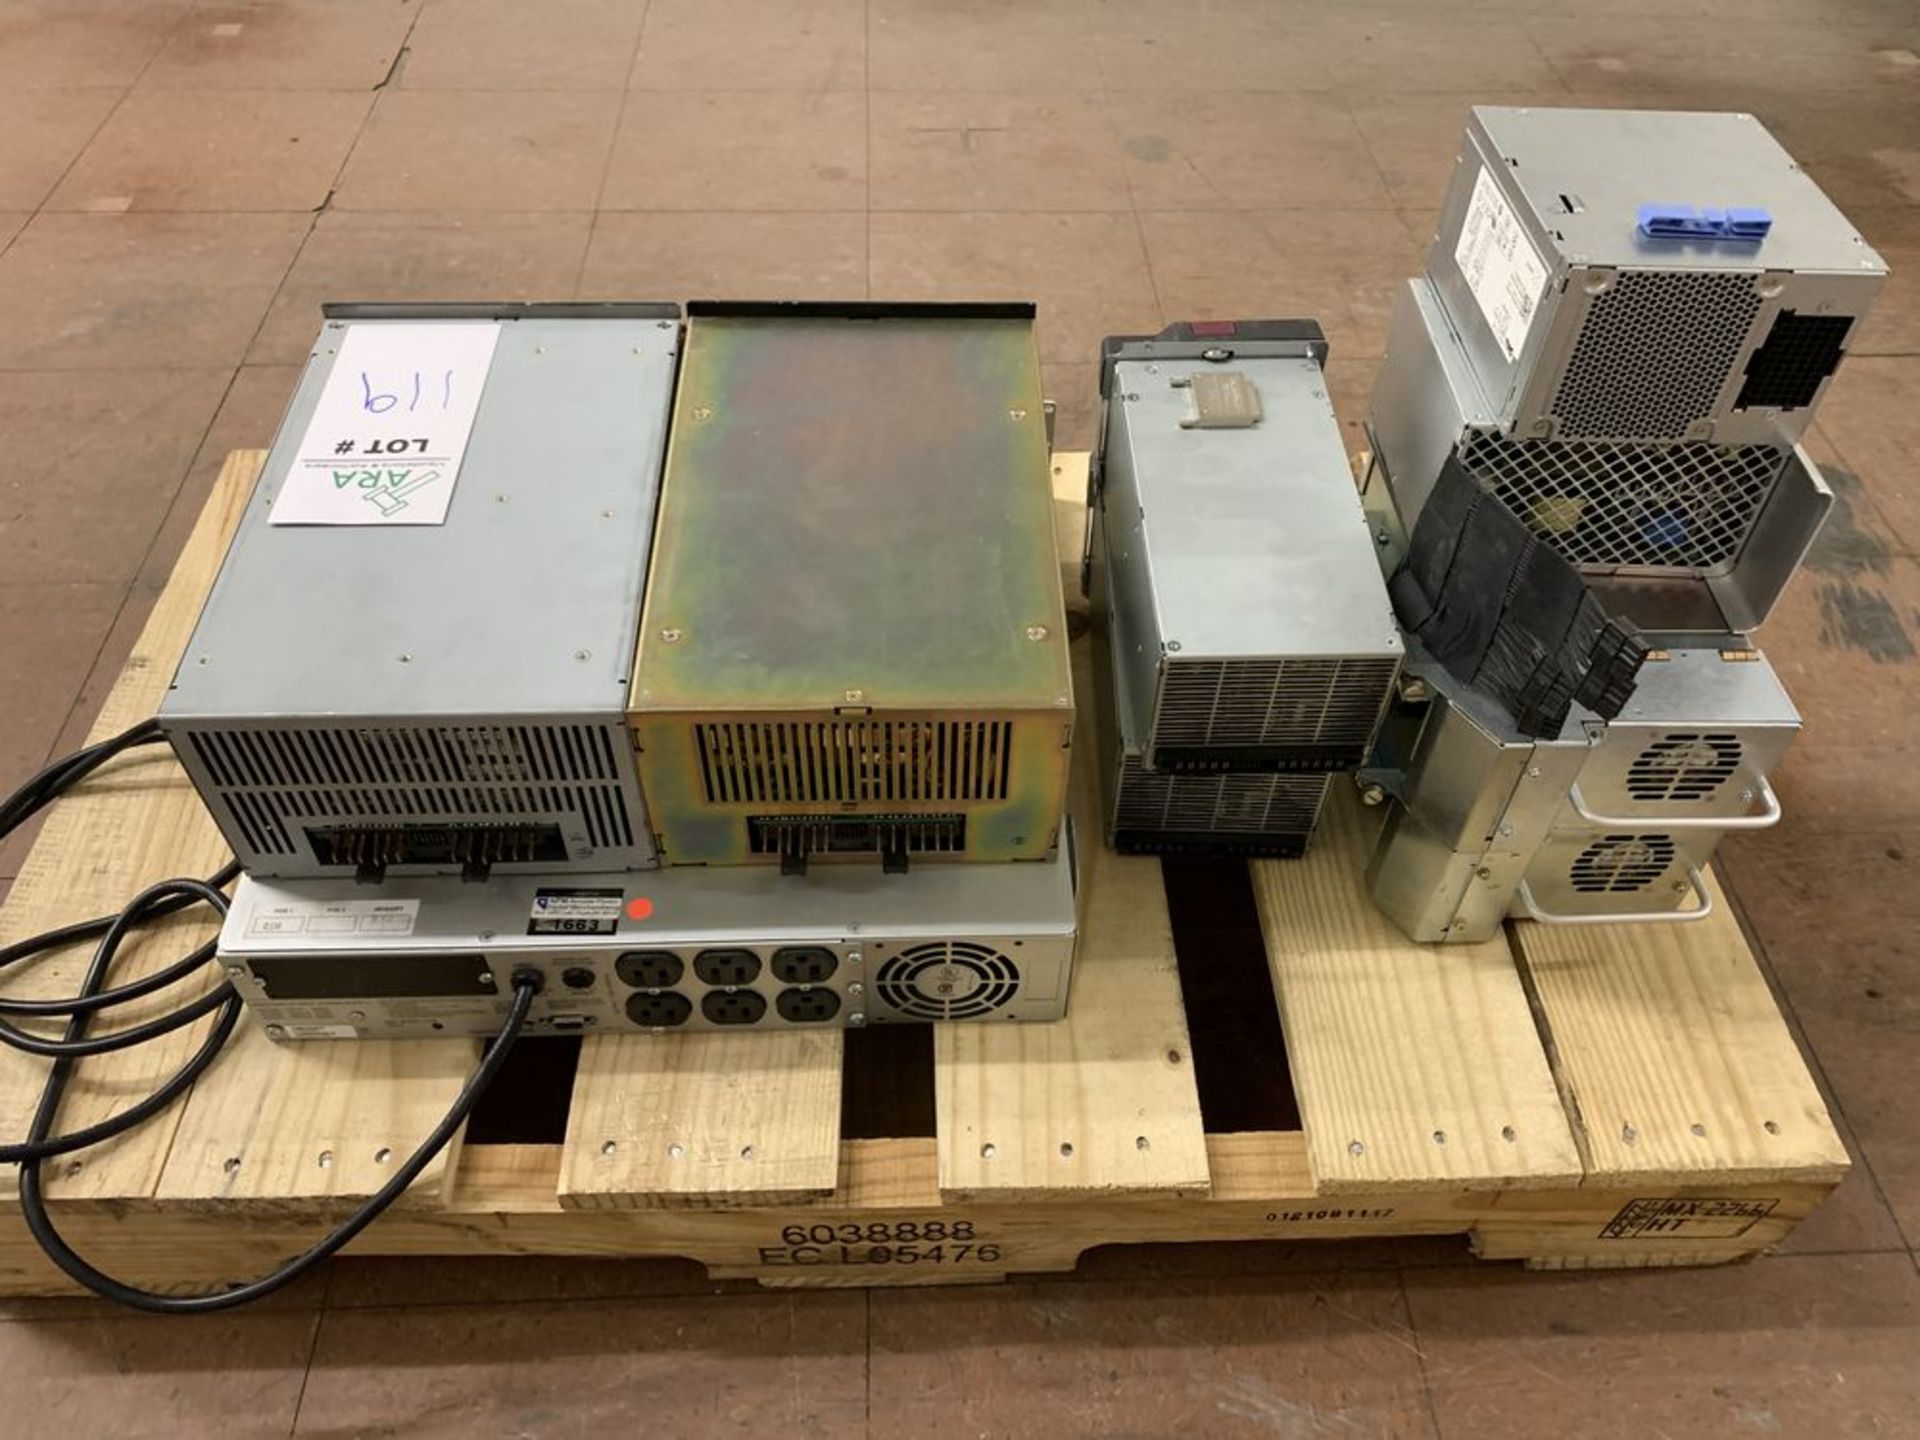 APC BACK-UP POWER UNIT & ASSORTED POWER UNITSALL ITEMS ARE SOLD AS IS UNTESTED BUT CAME FROM A - Image 4 of 6